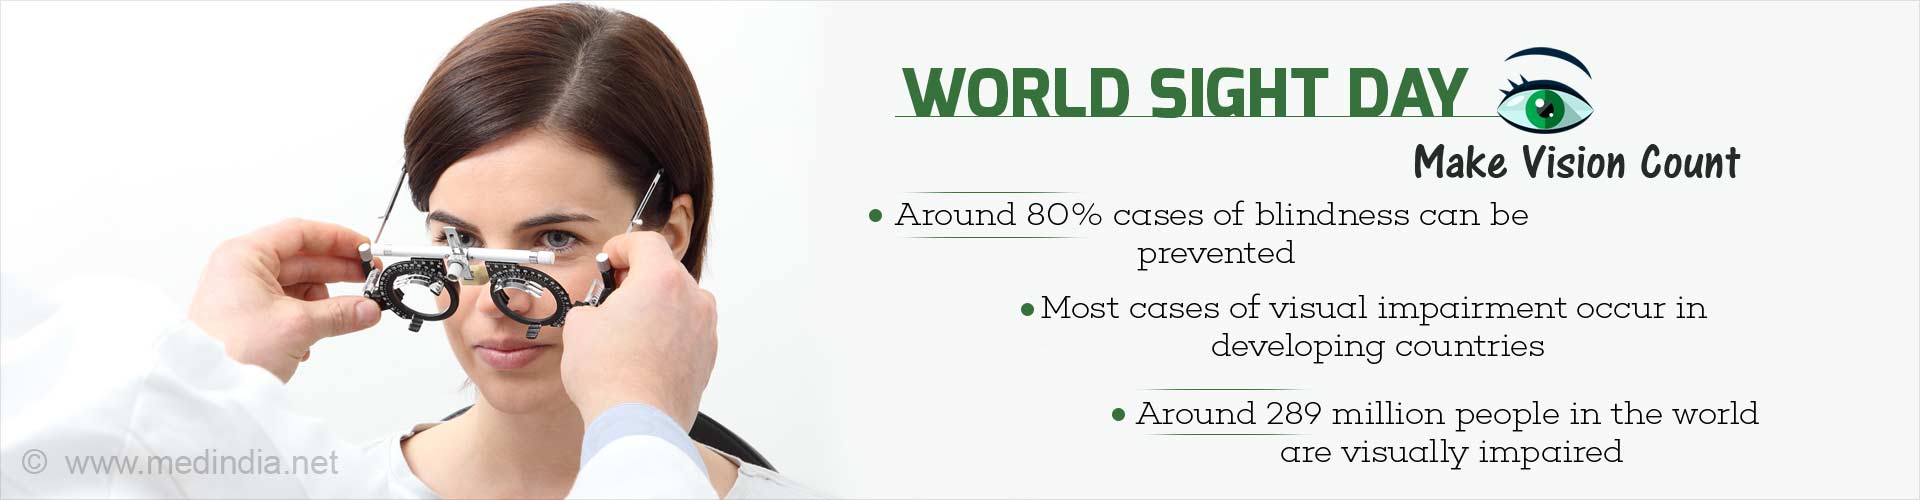 World Sight Day: Make Vision Count
- Around 80% cases of blindness can be prevented
- Most cases of visual impairment occur in developing countries
- Around 289 million people in the world are visually impaired